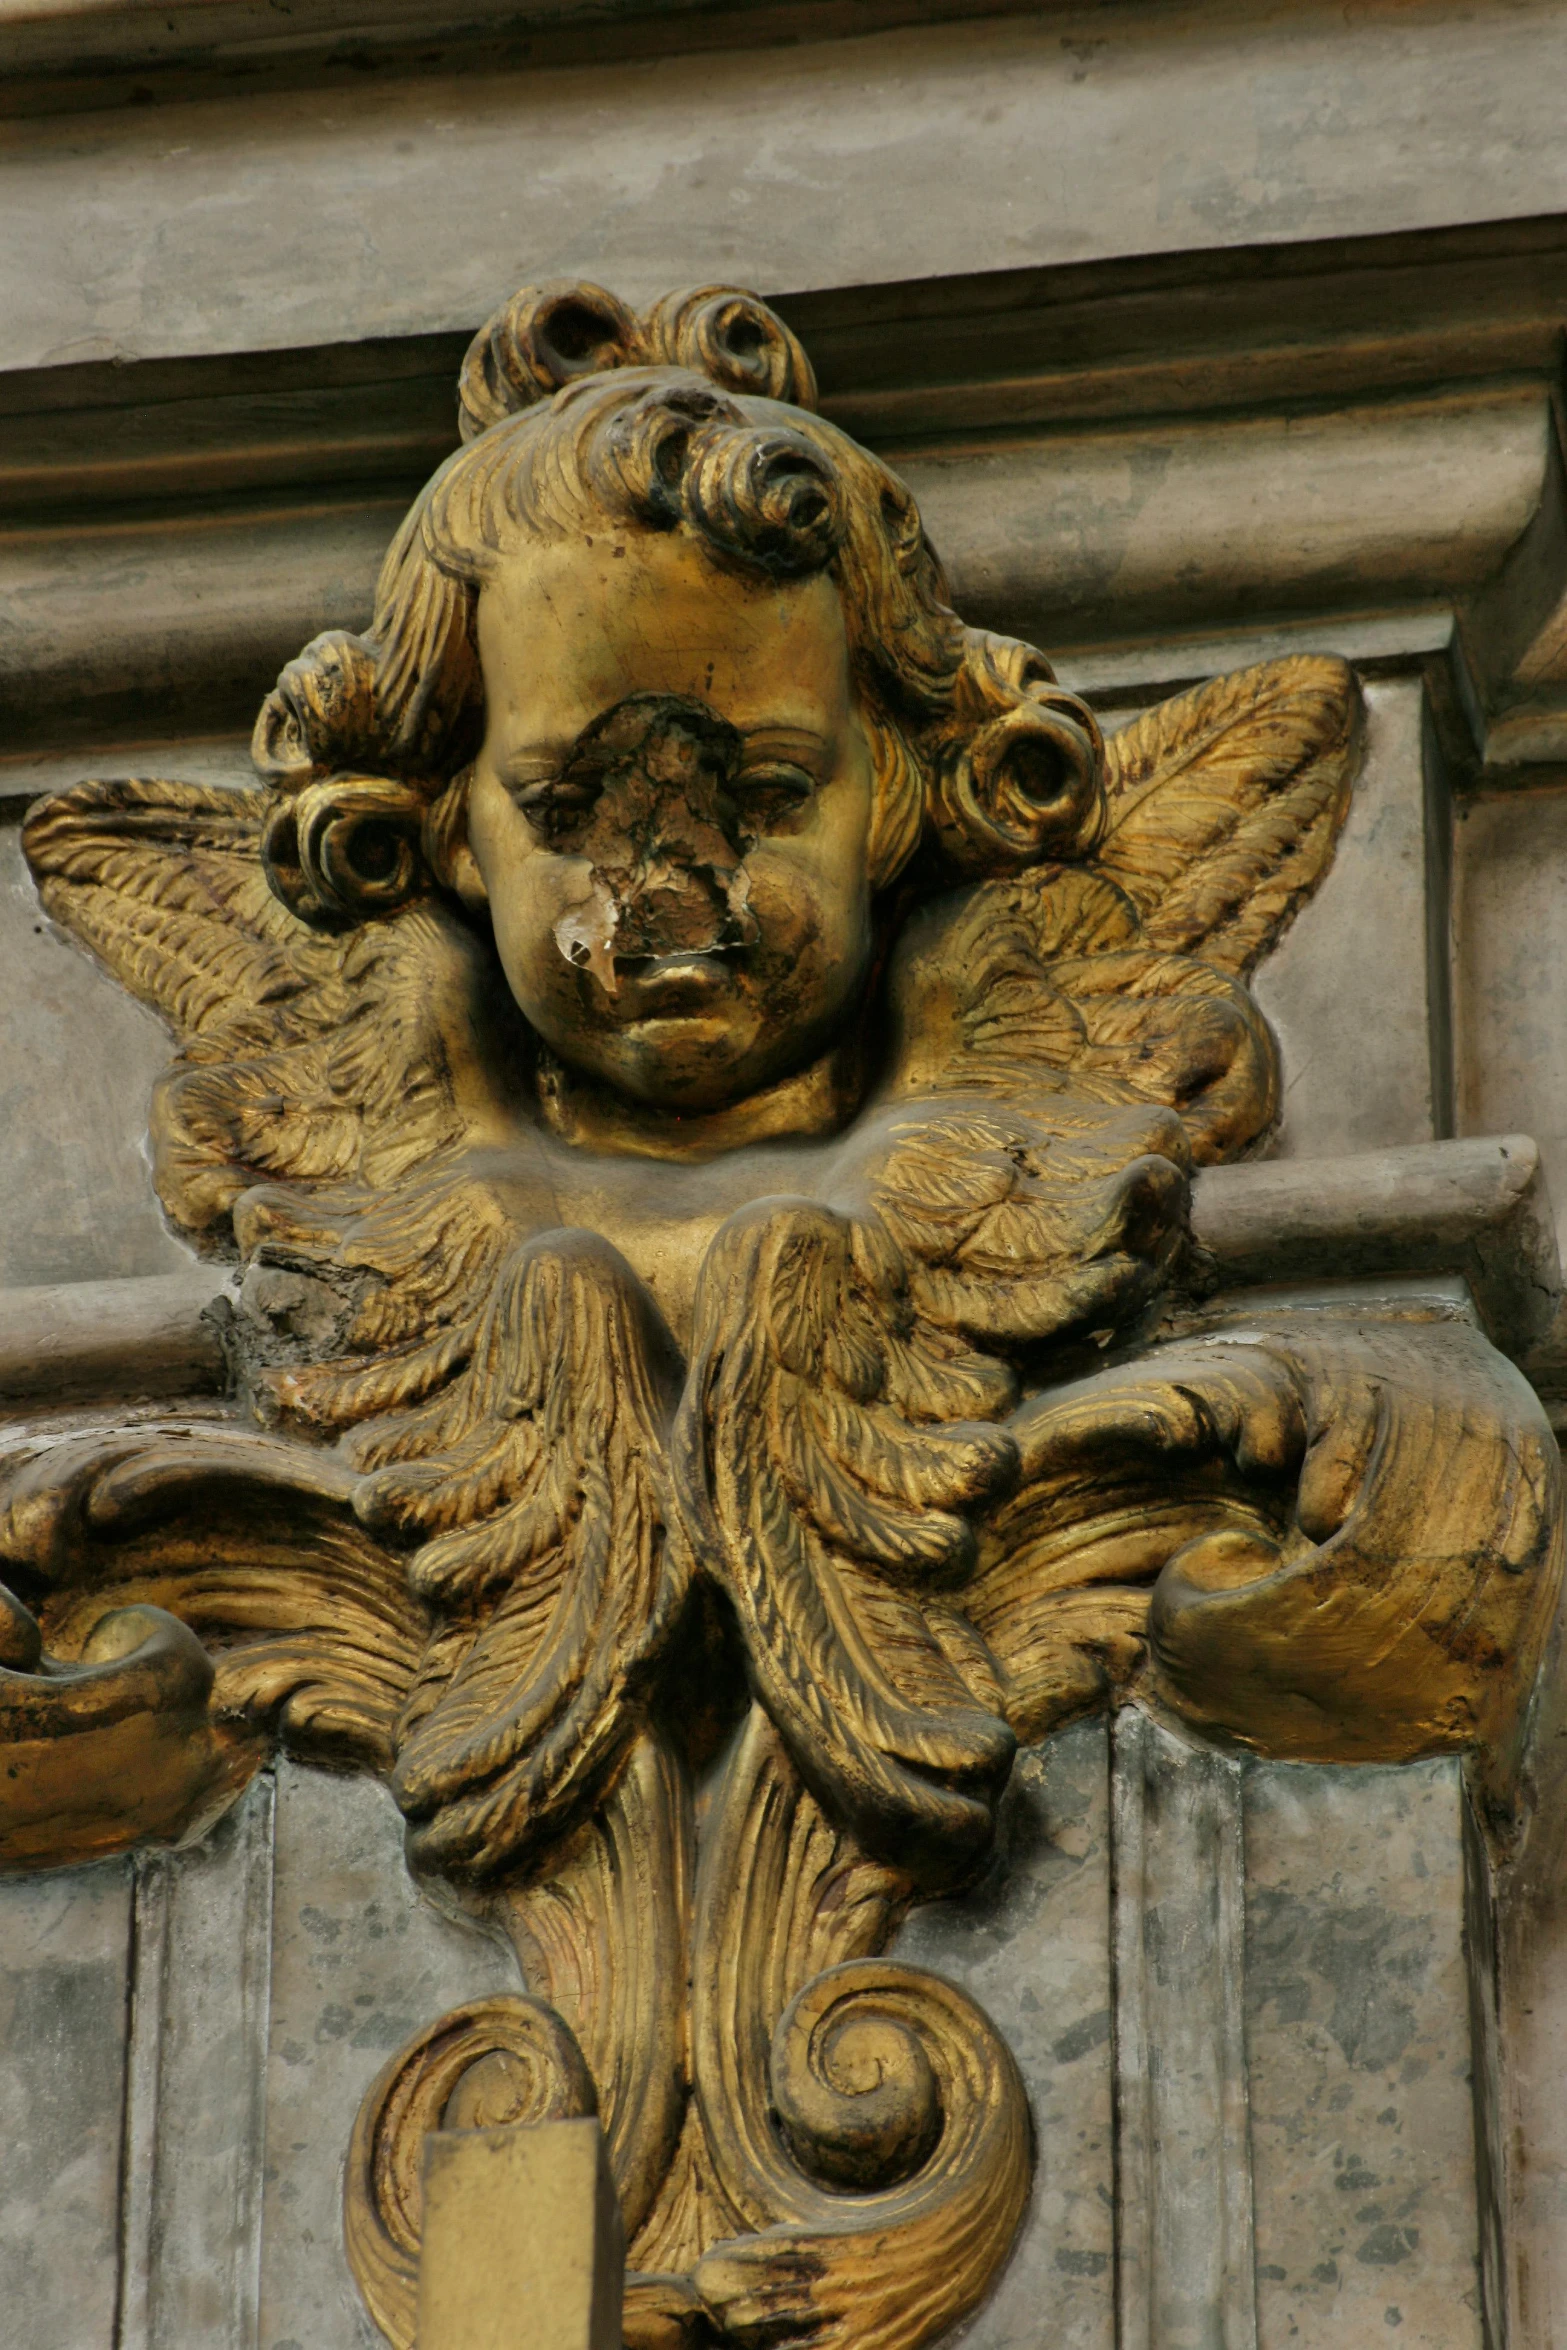 an antique statue has winged, elaborate ornaments on the outside of it